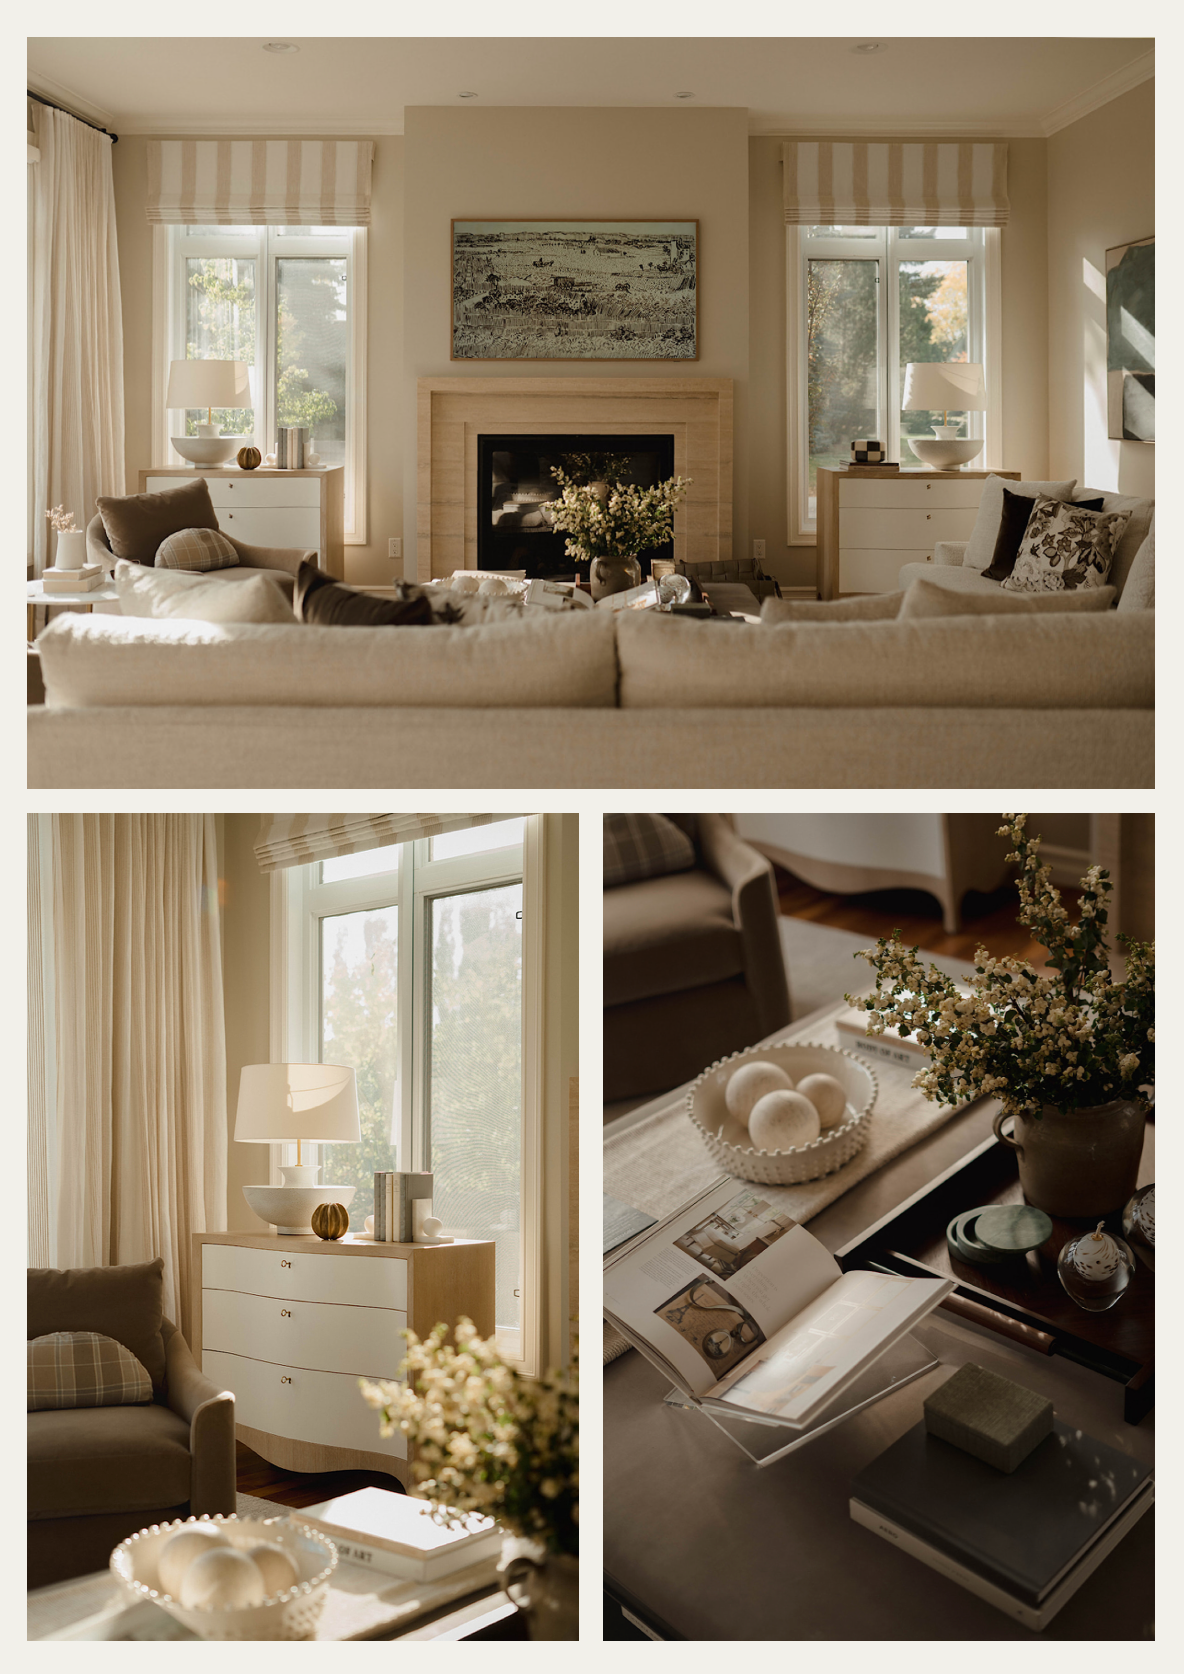 Three images depicting Stephenson House interior design project City Proper in Edmonton's Glenora neighbourhood. The images feature elevated living room design.